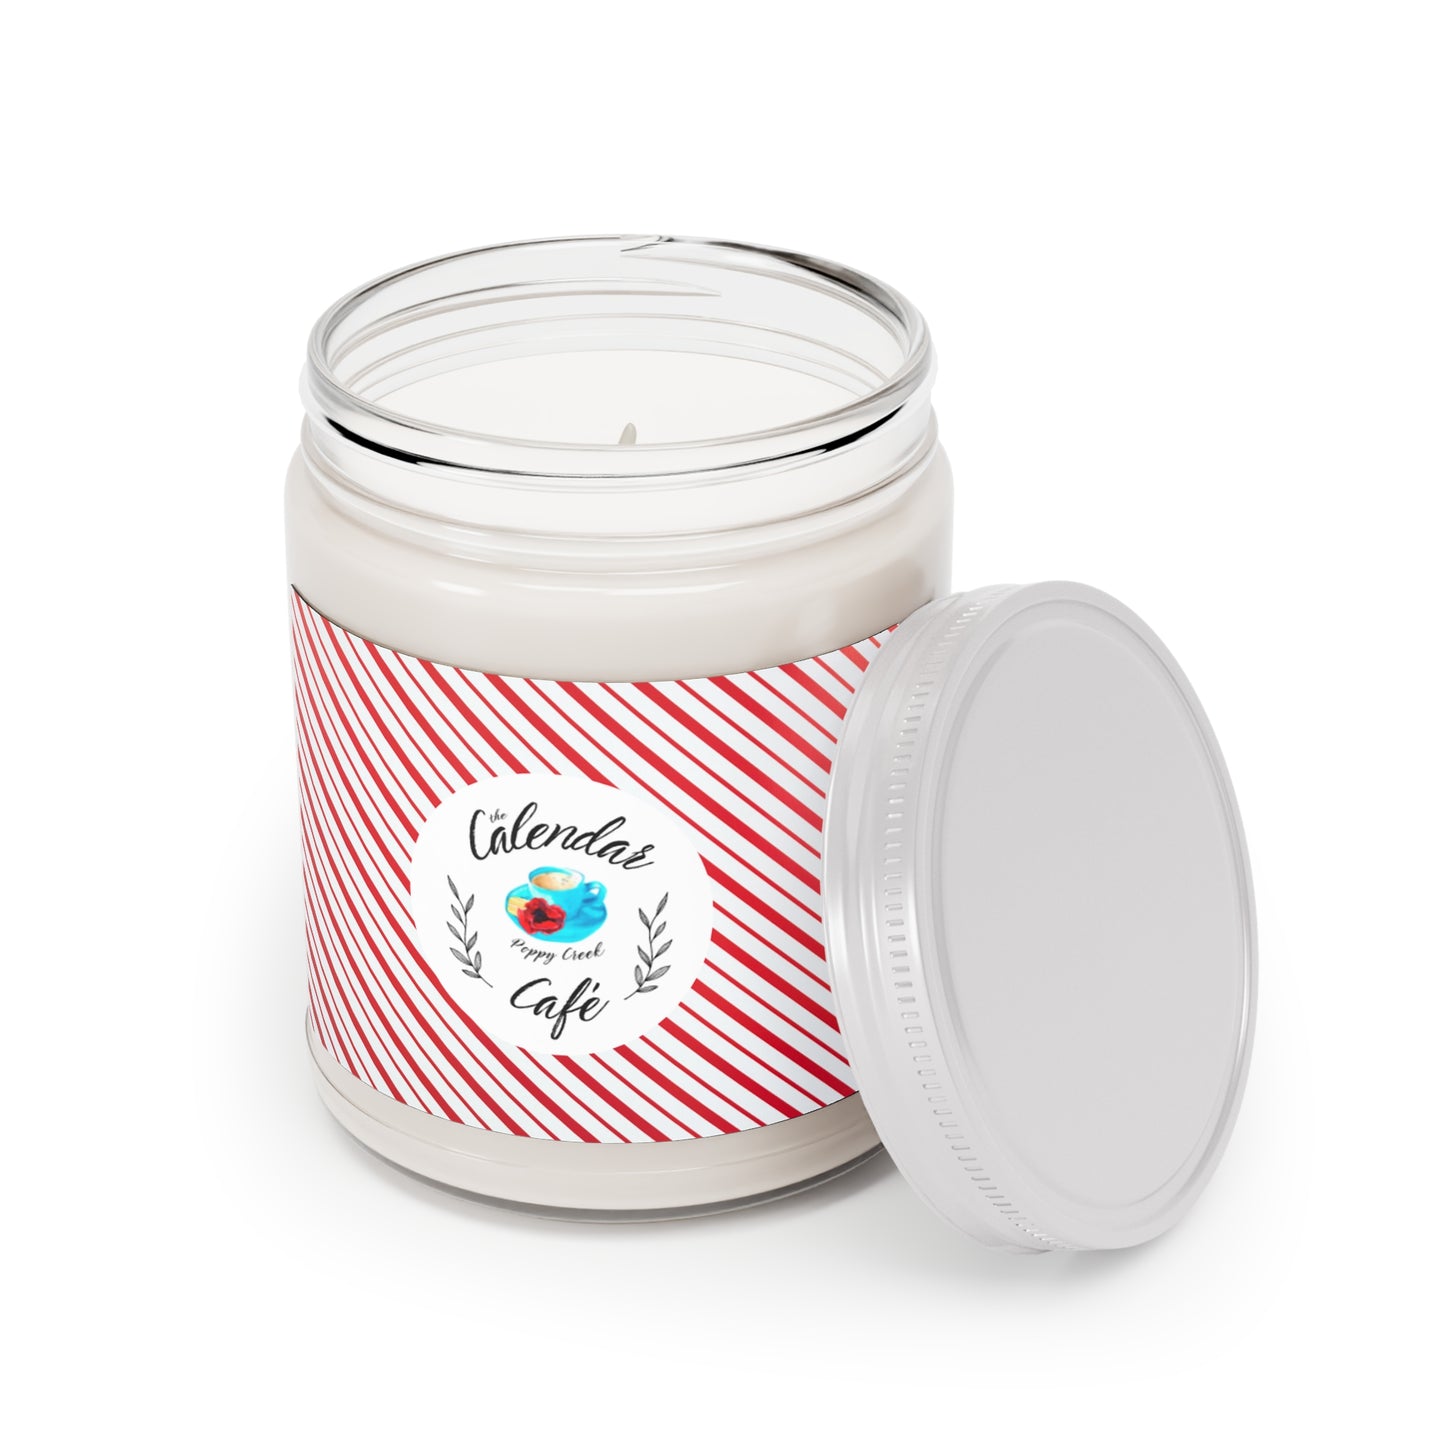 The Calendar Café Scented Soy Candle, 9oz (Holiday Design) - FREE U.S. SHIPPING